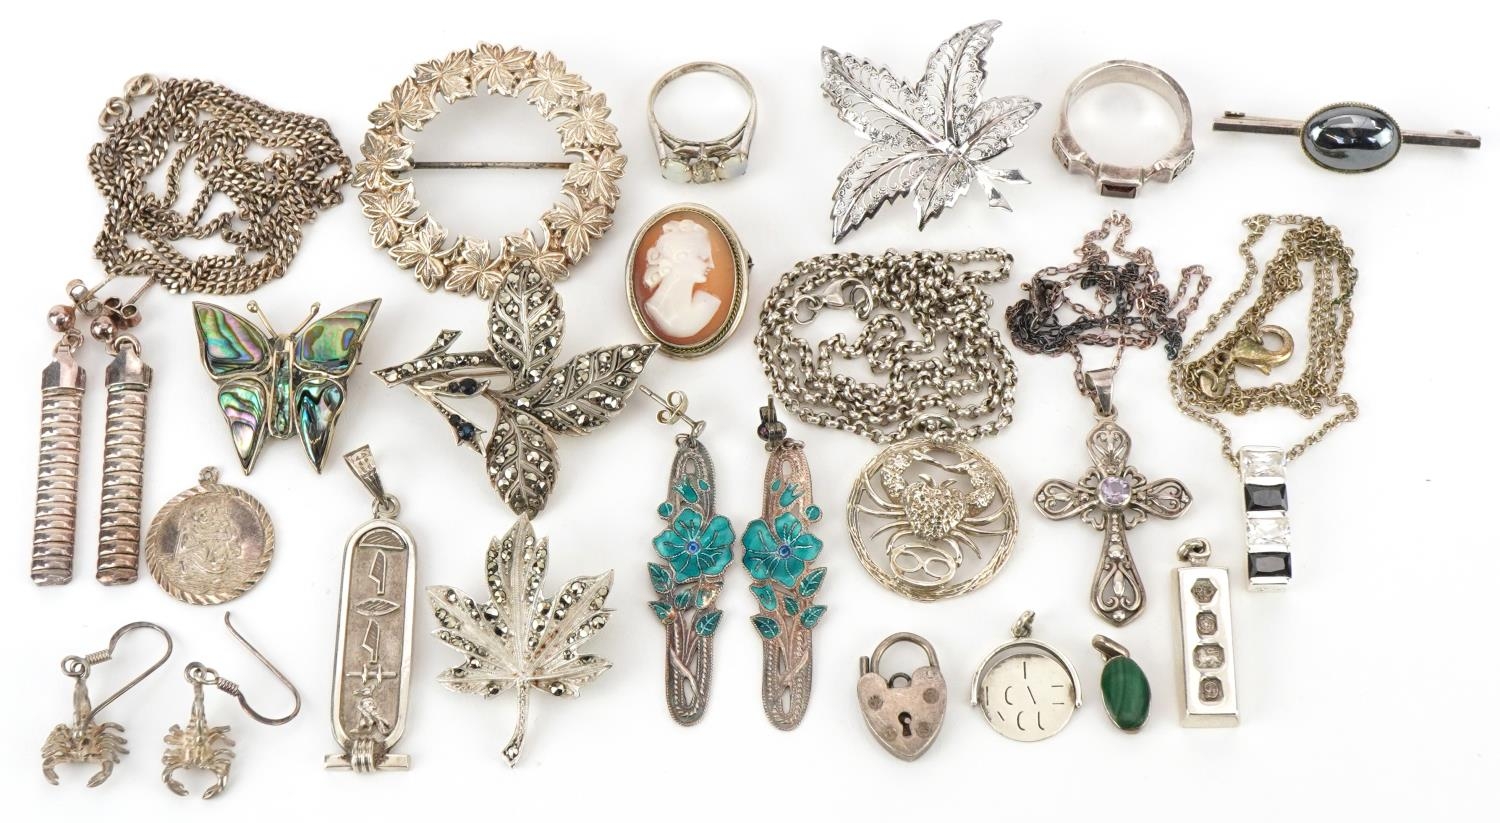 Silver jewellery including marcasite brooches, pair of scorpion earrings, I Love You spinner charm